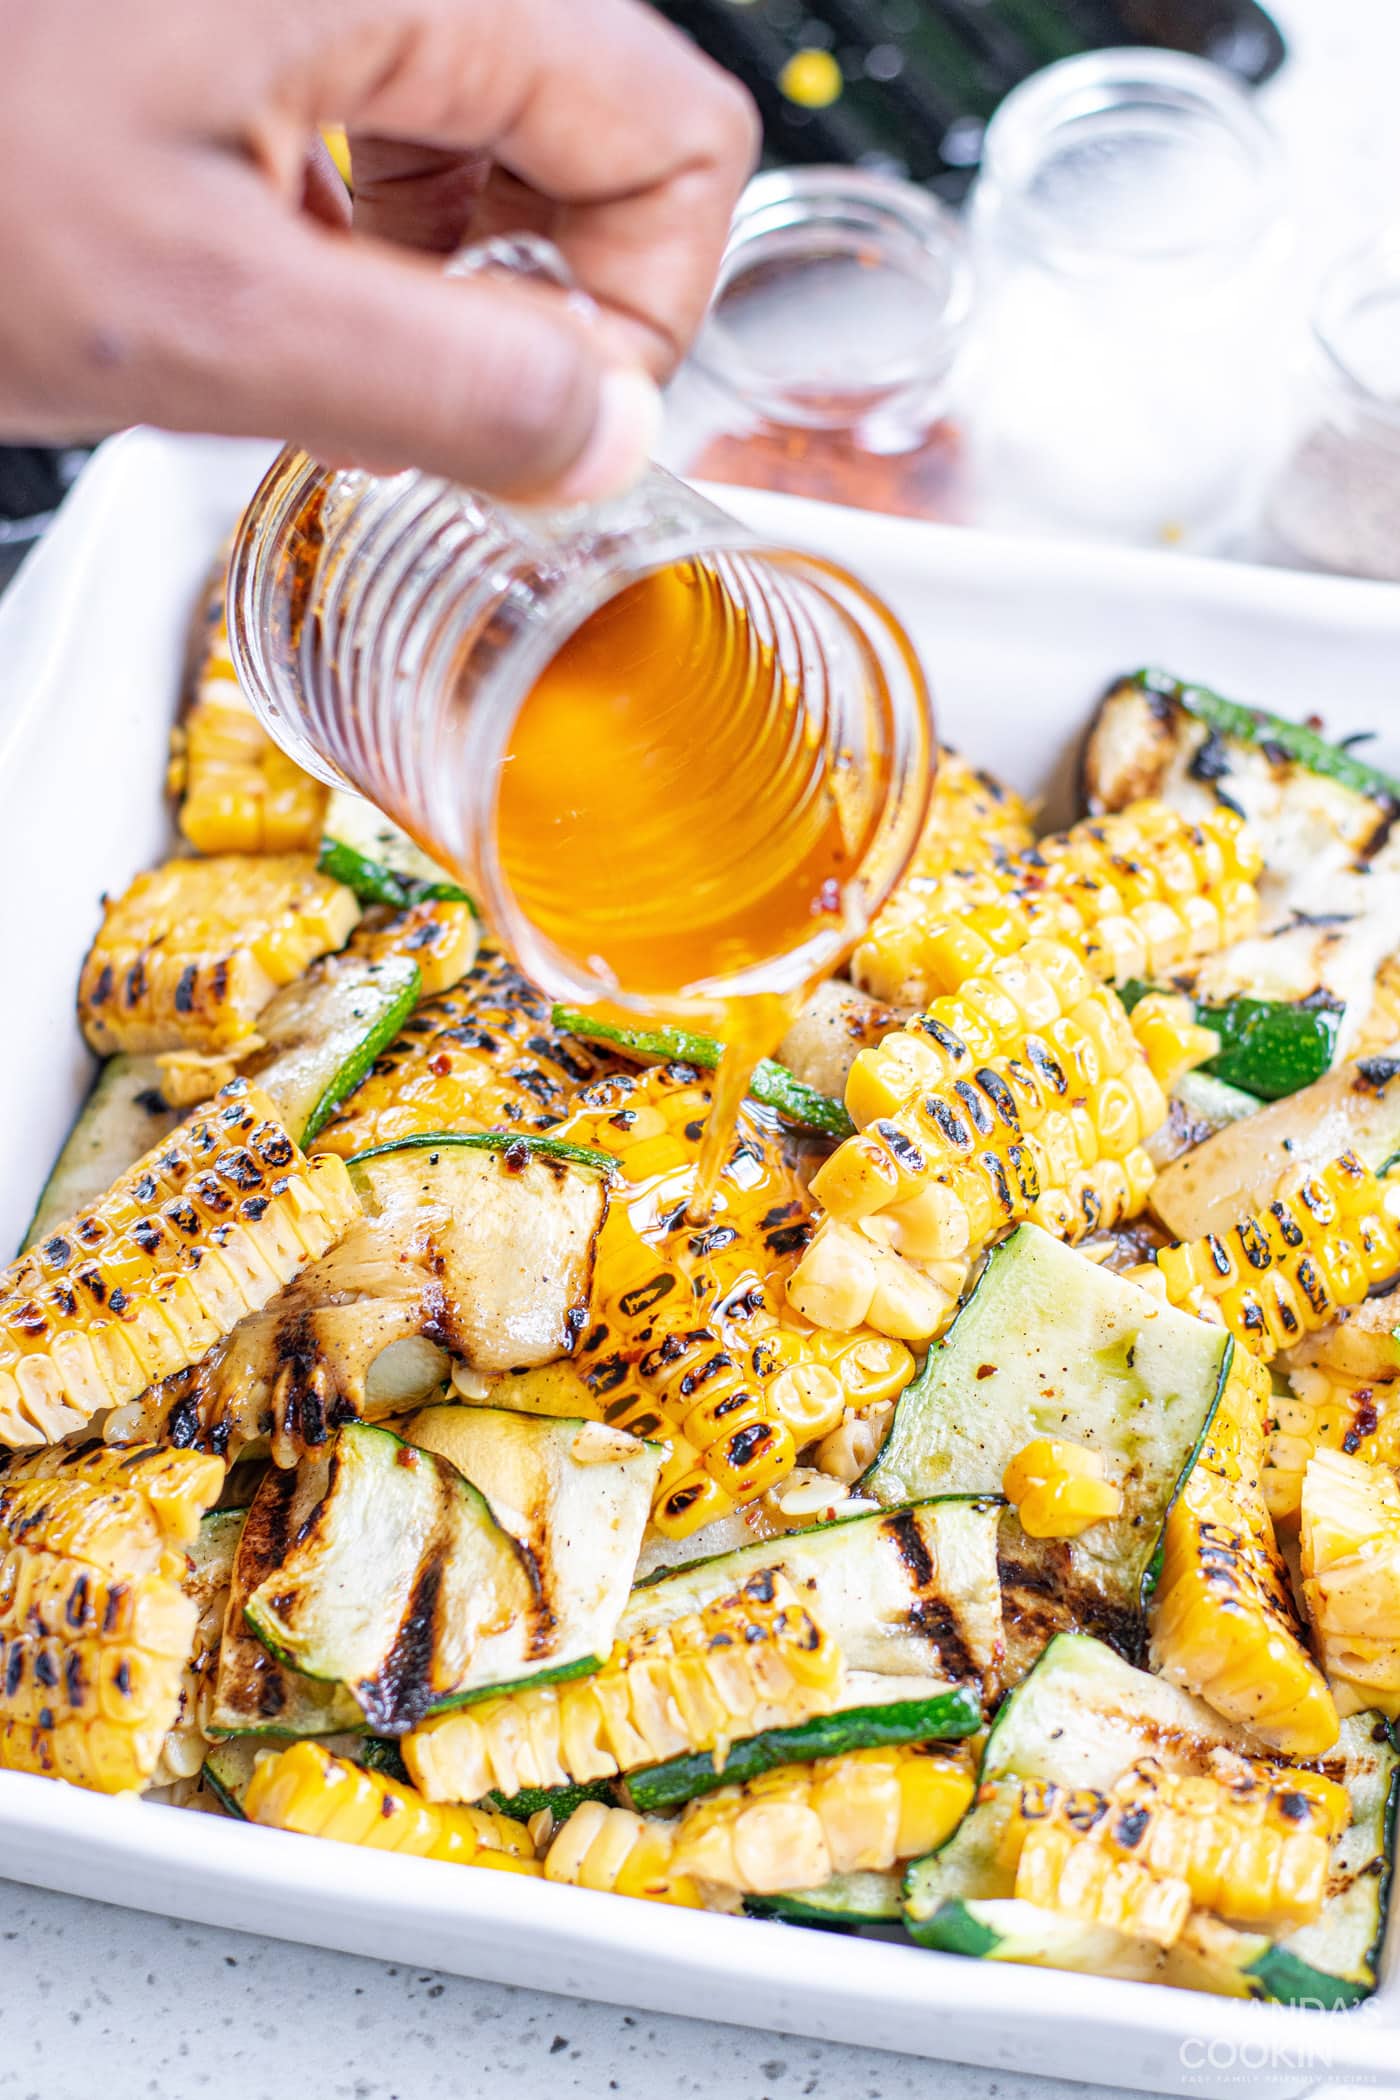 adding olive oil to grilled corn and zucchini salad with feta